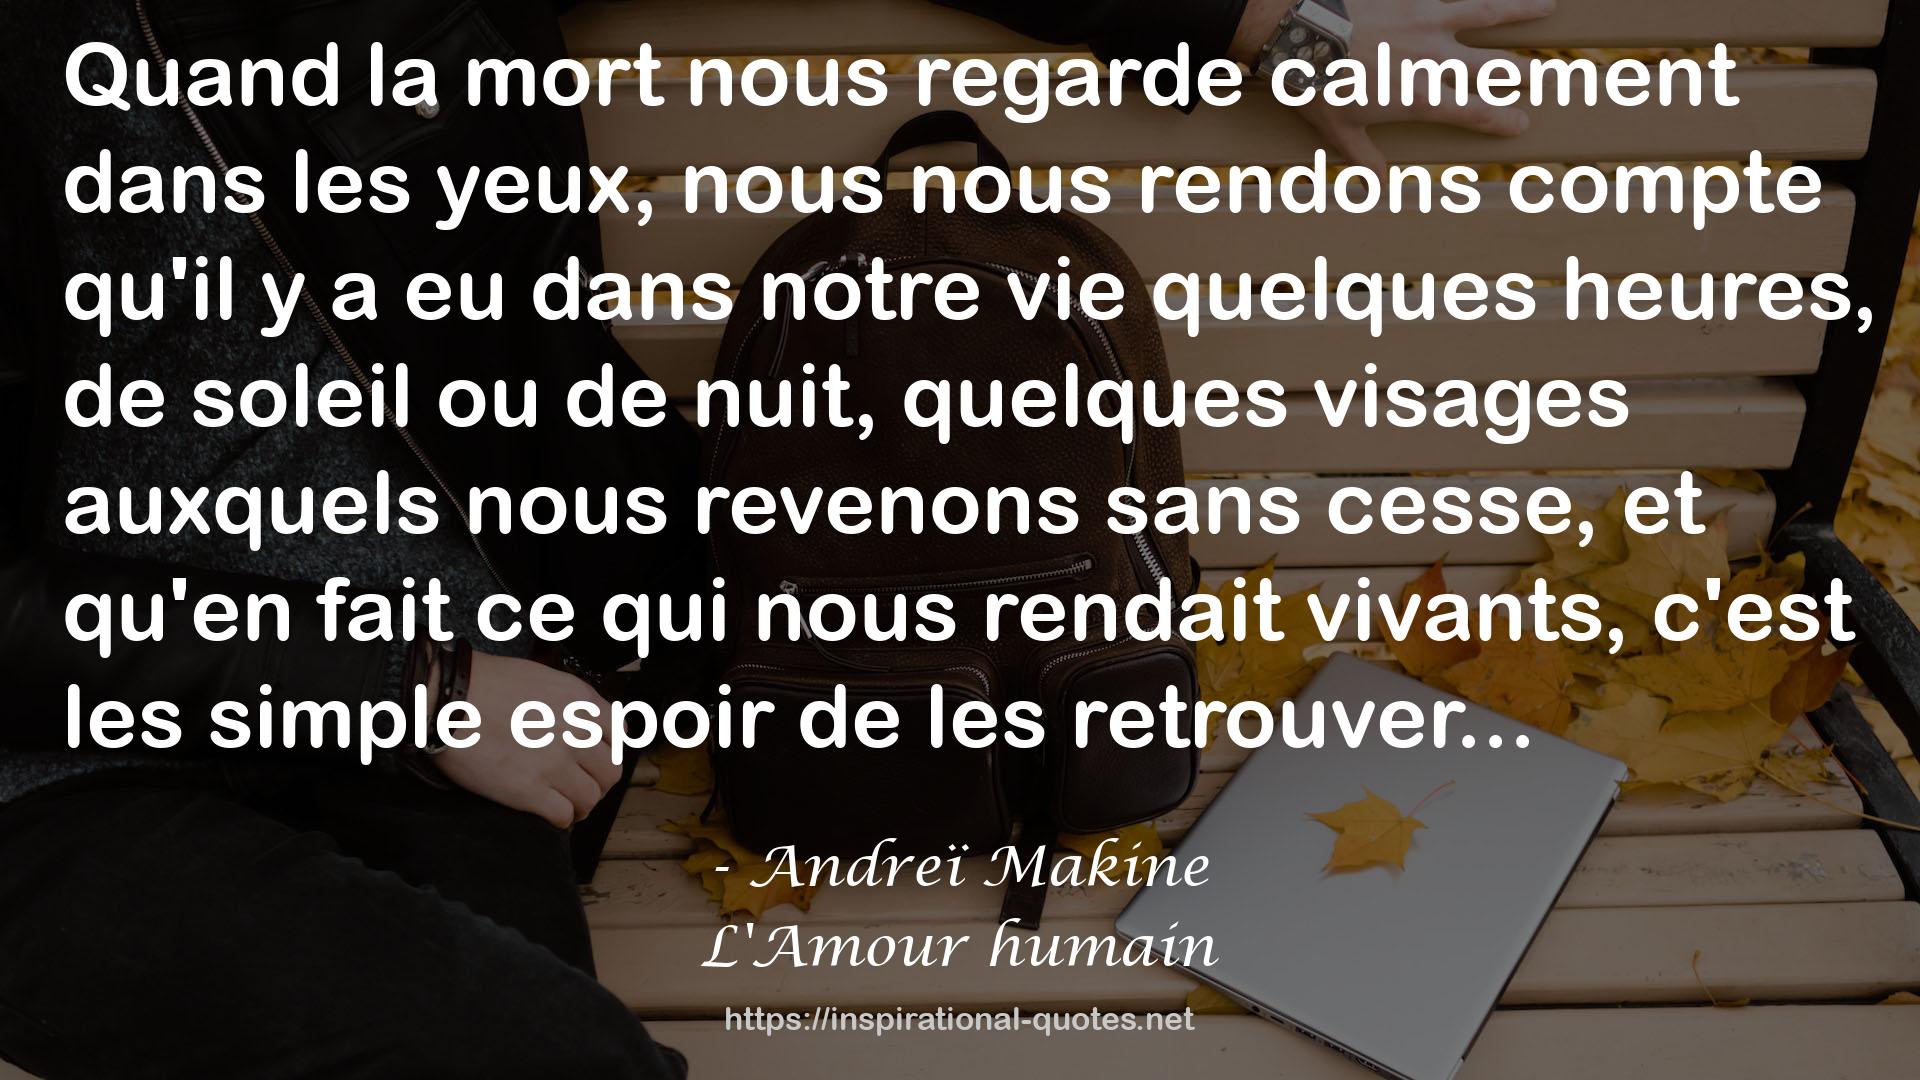 L'Amour humain QUOTES